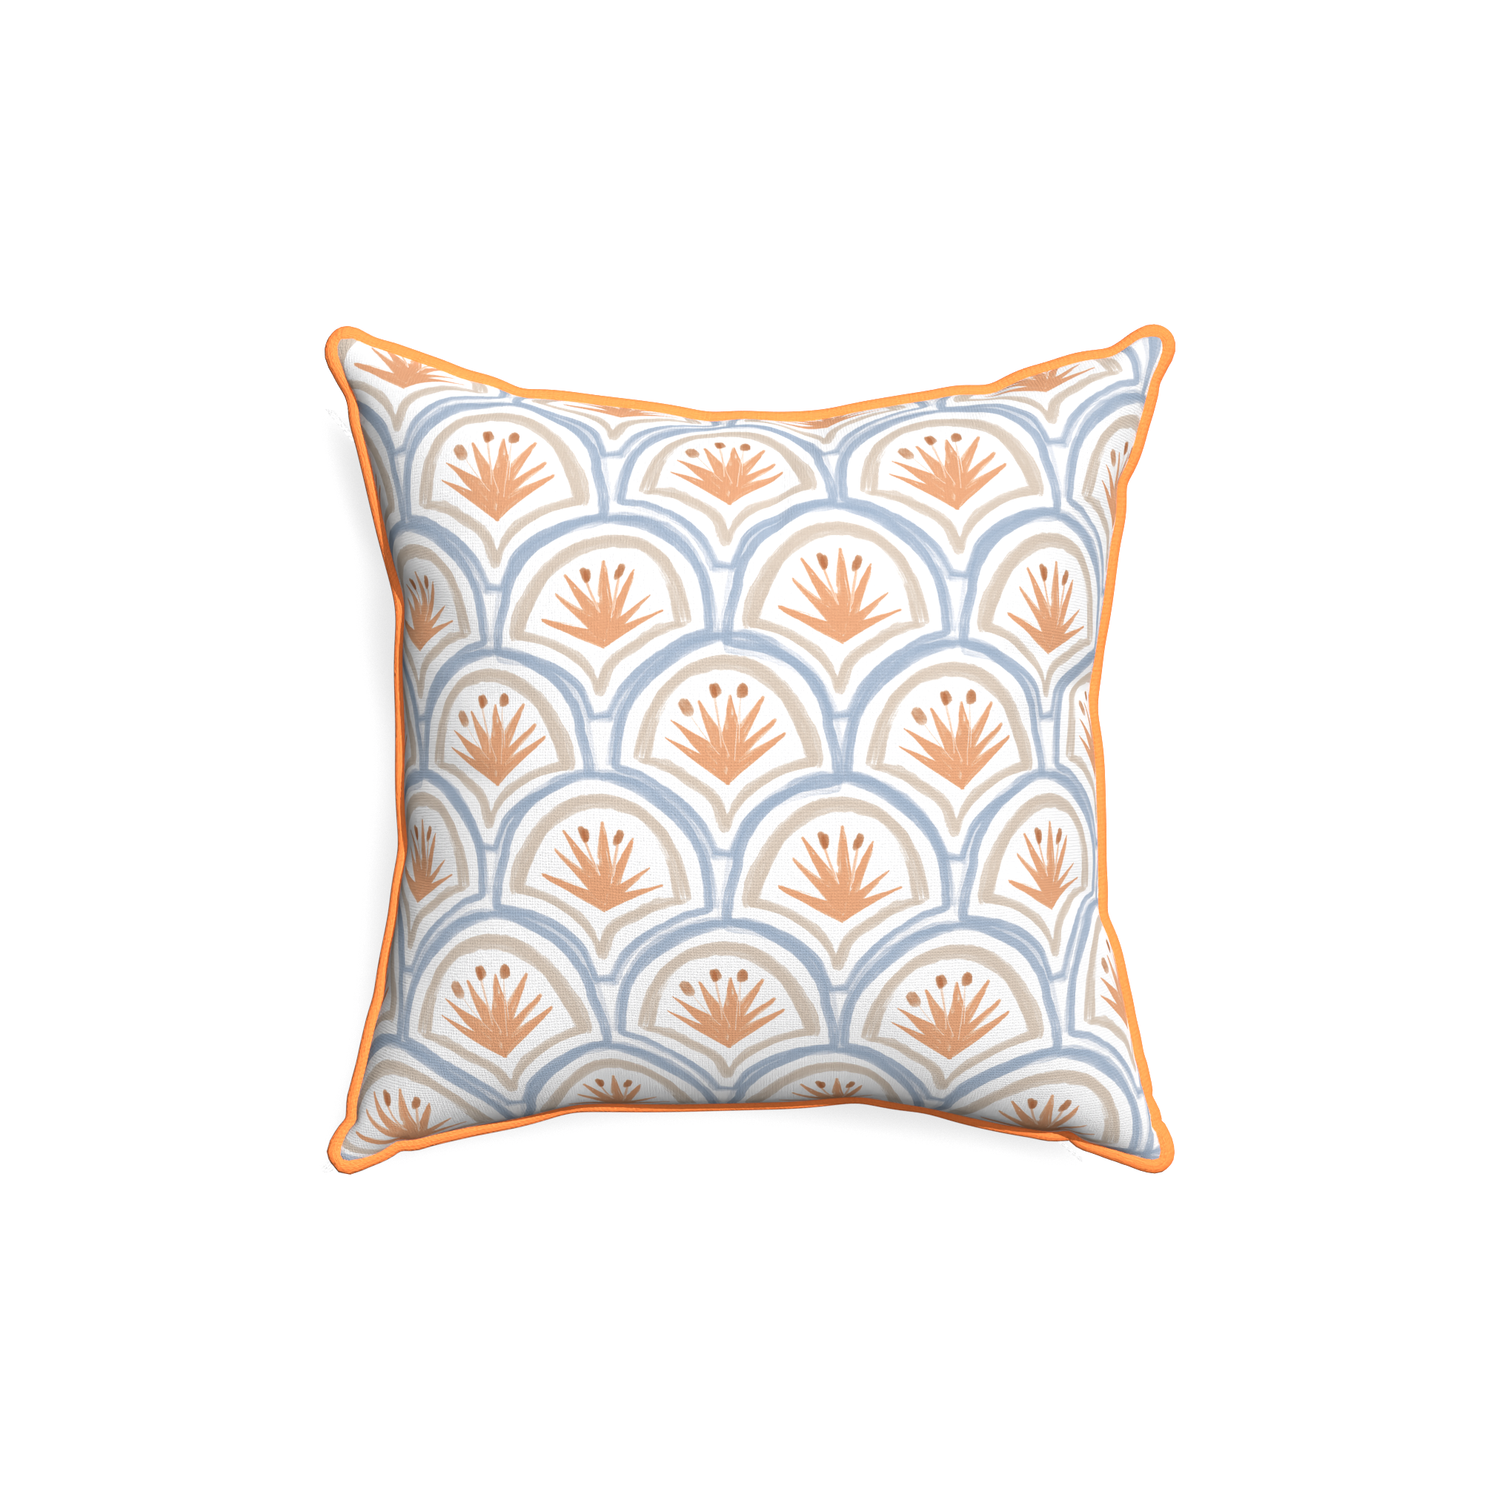 18-square thatcher apricot custom pillow with clementine piping on white background